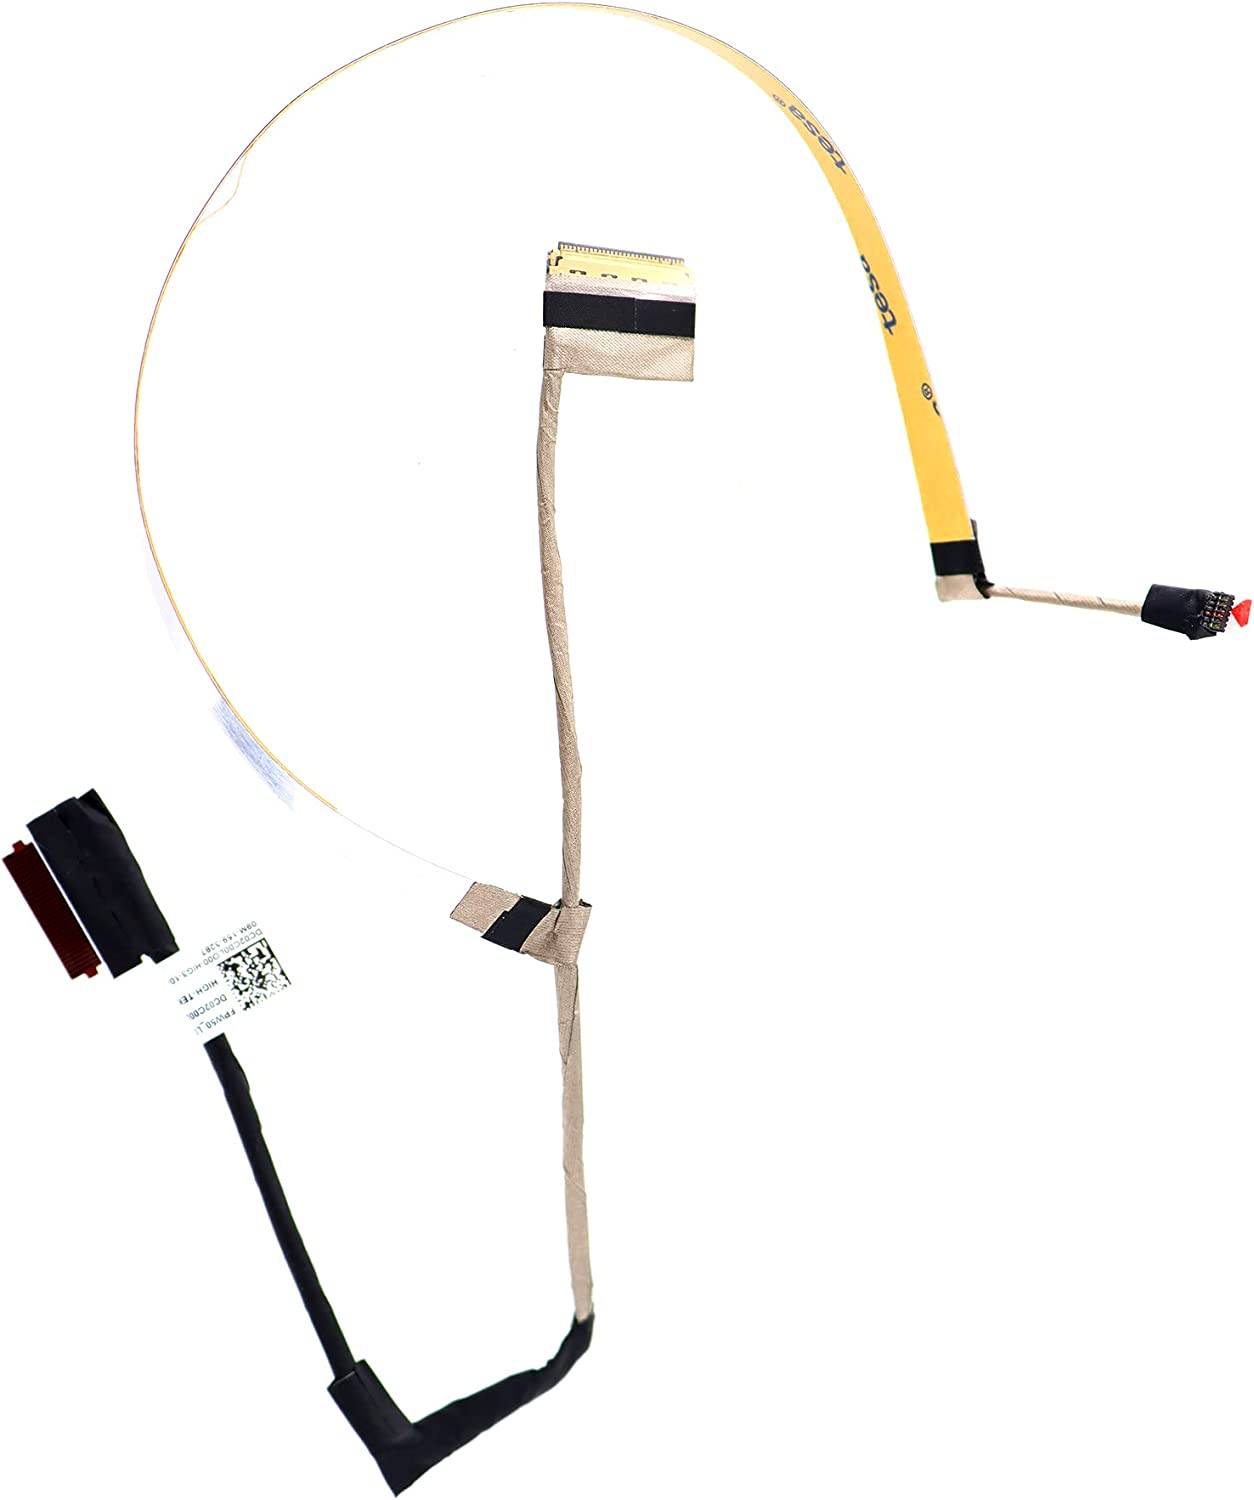 CABLE-LCD-FPW50-30-PINES-LAPTOP-HP-15s-DY-15s-dy0000-15s-DU-15-CS-15-DW-15-DW0037WM-DC02C00LO00-REV-1.0-idkmanager3.jpg